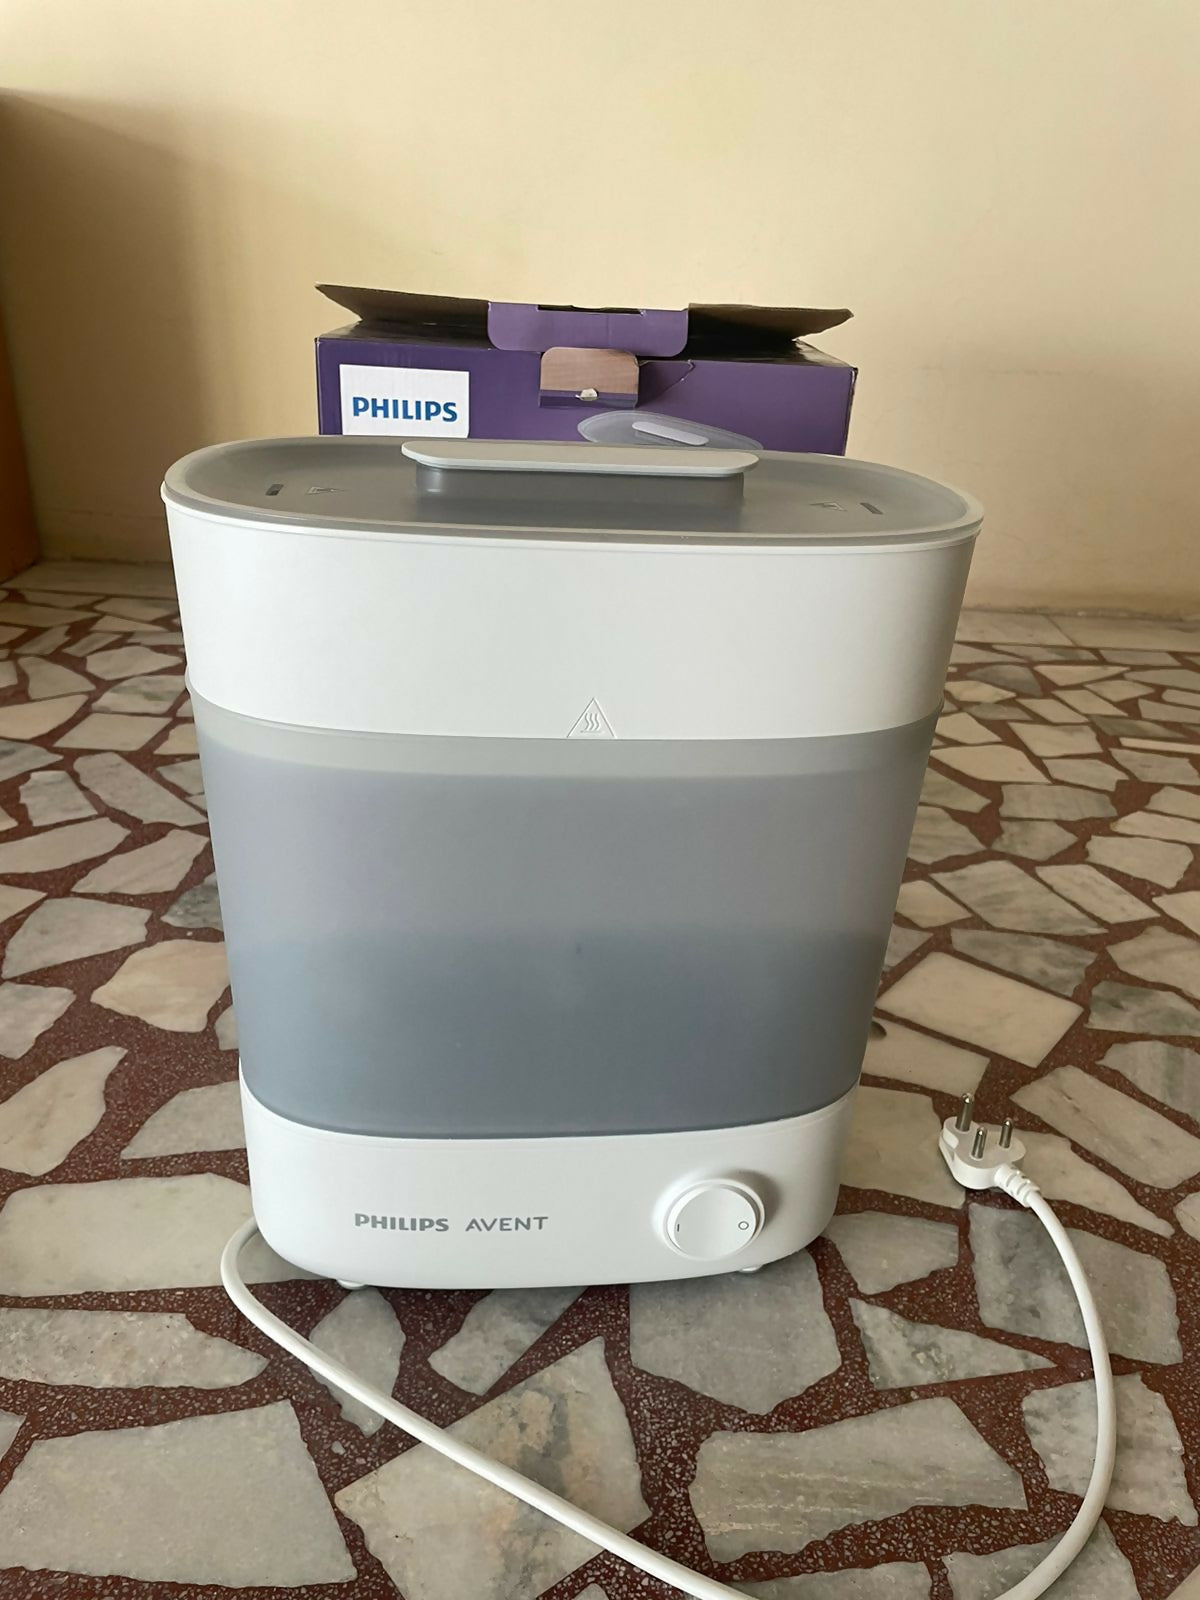 Safeguard your baby's health with the PHILIPS Avent Sterilizer, using steam sterilization to eliminate harmful germs and bacteria from bottles and accessories.